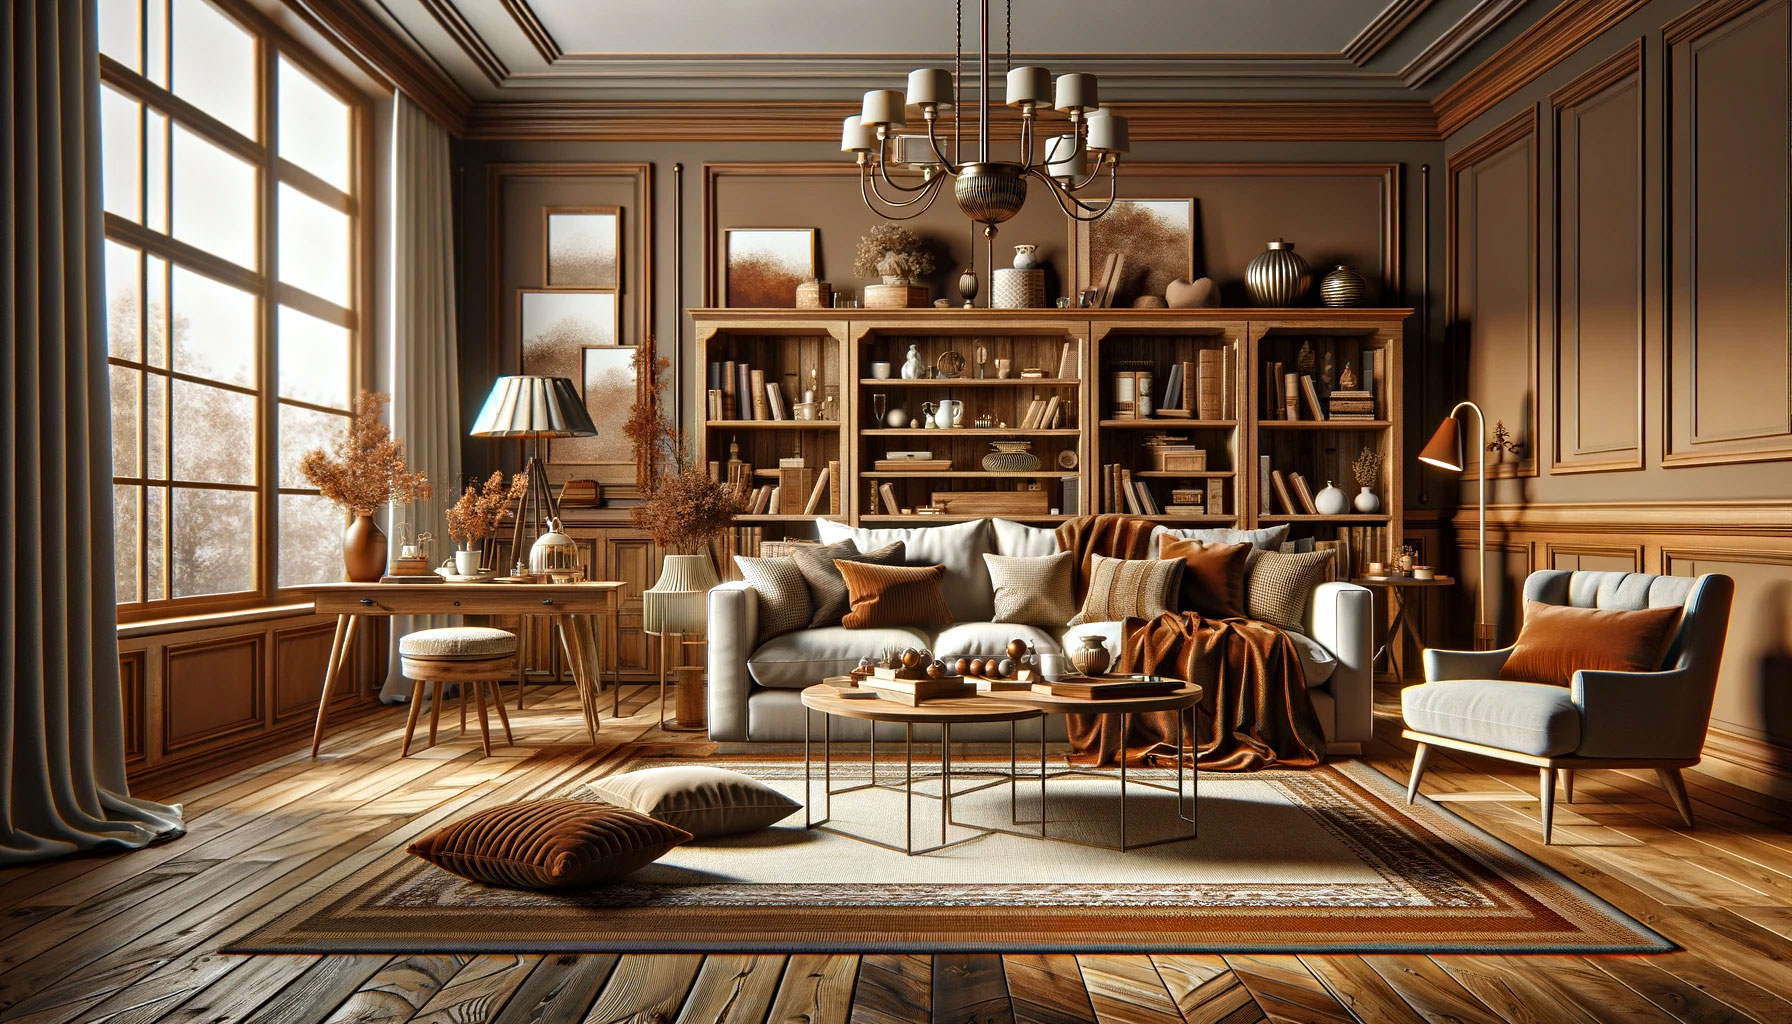 The Colour Psychology of Brown in Interior Design